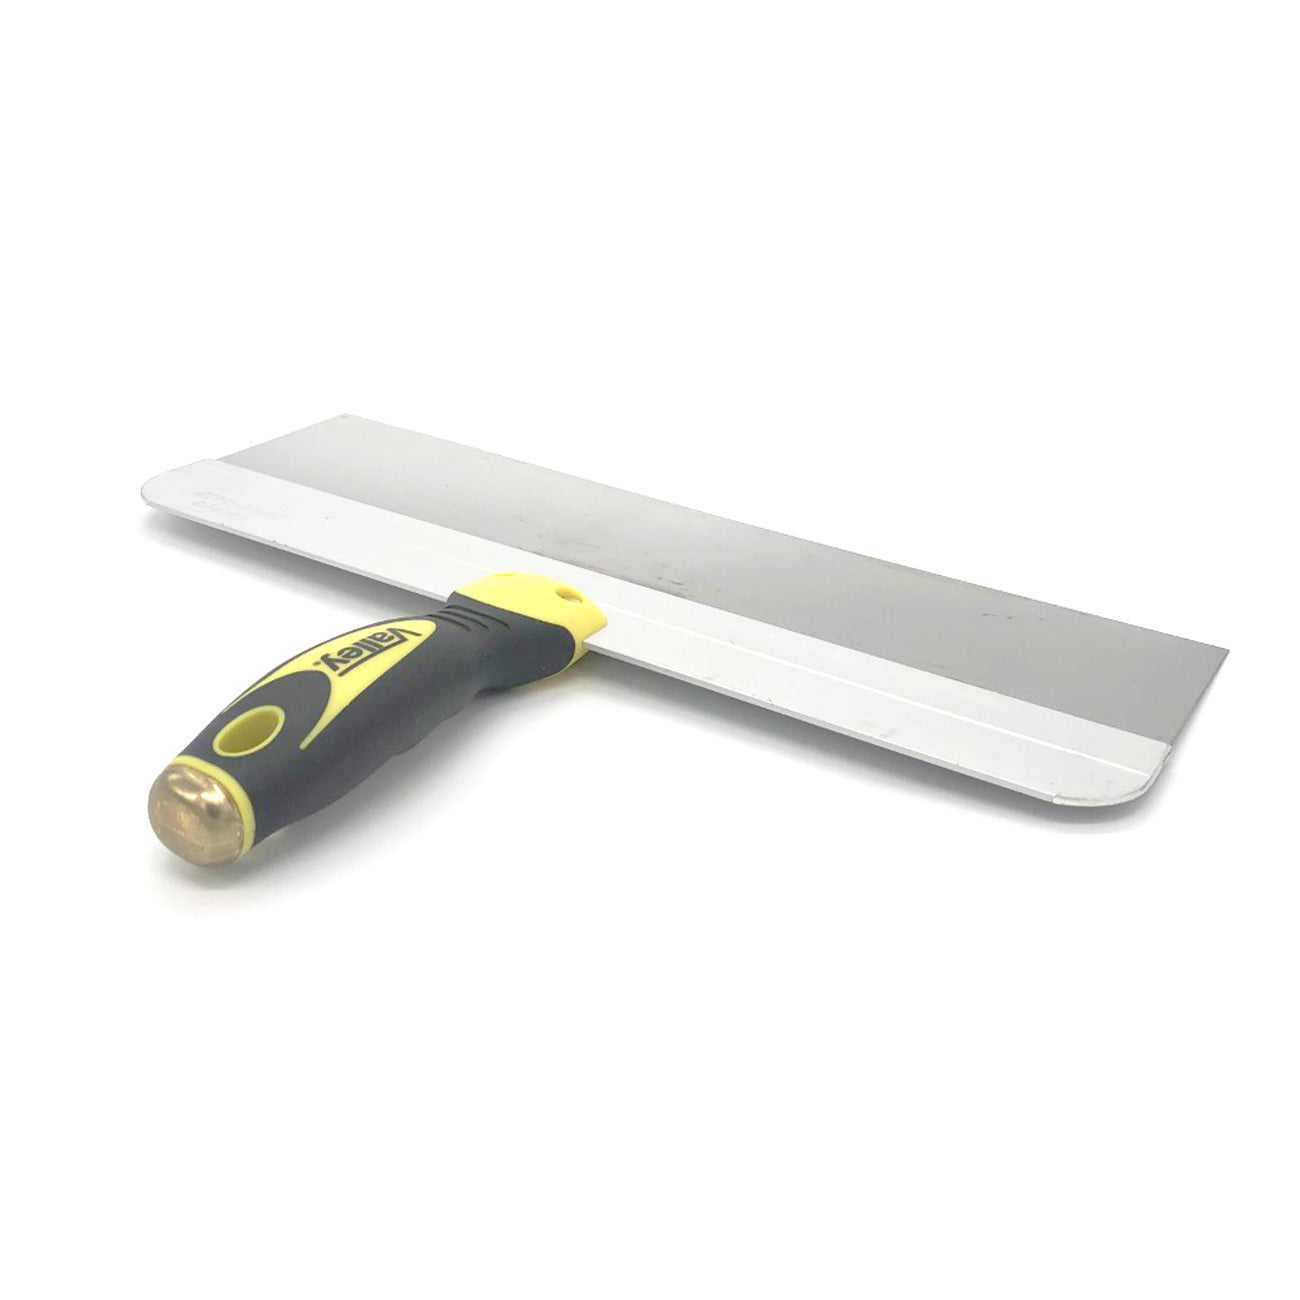 14" SS Drywall Taping Knife Soft-touch Hndl